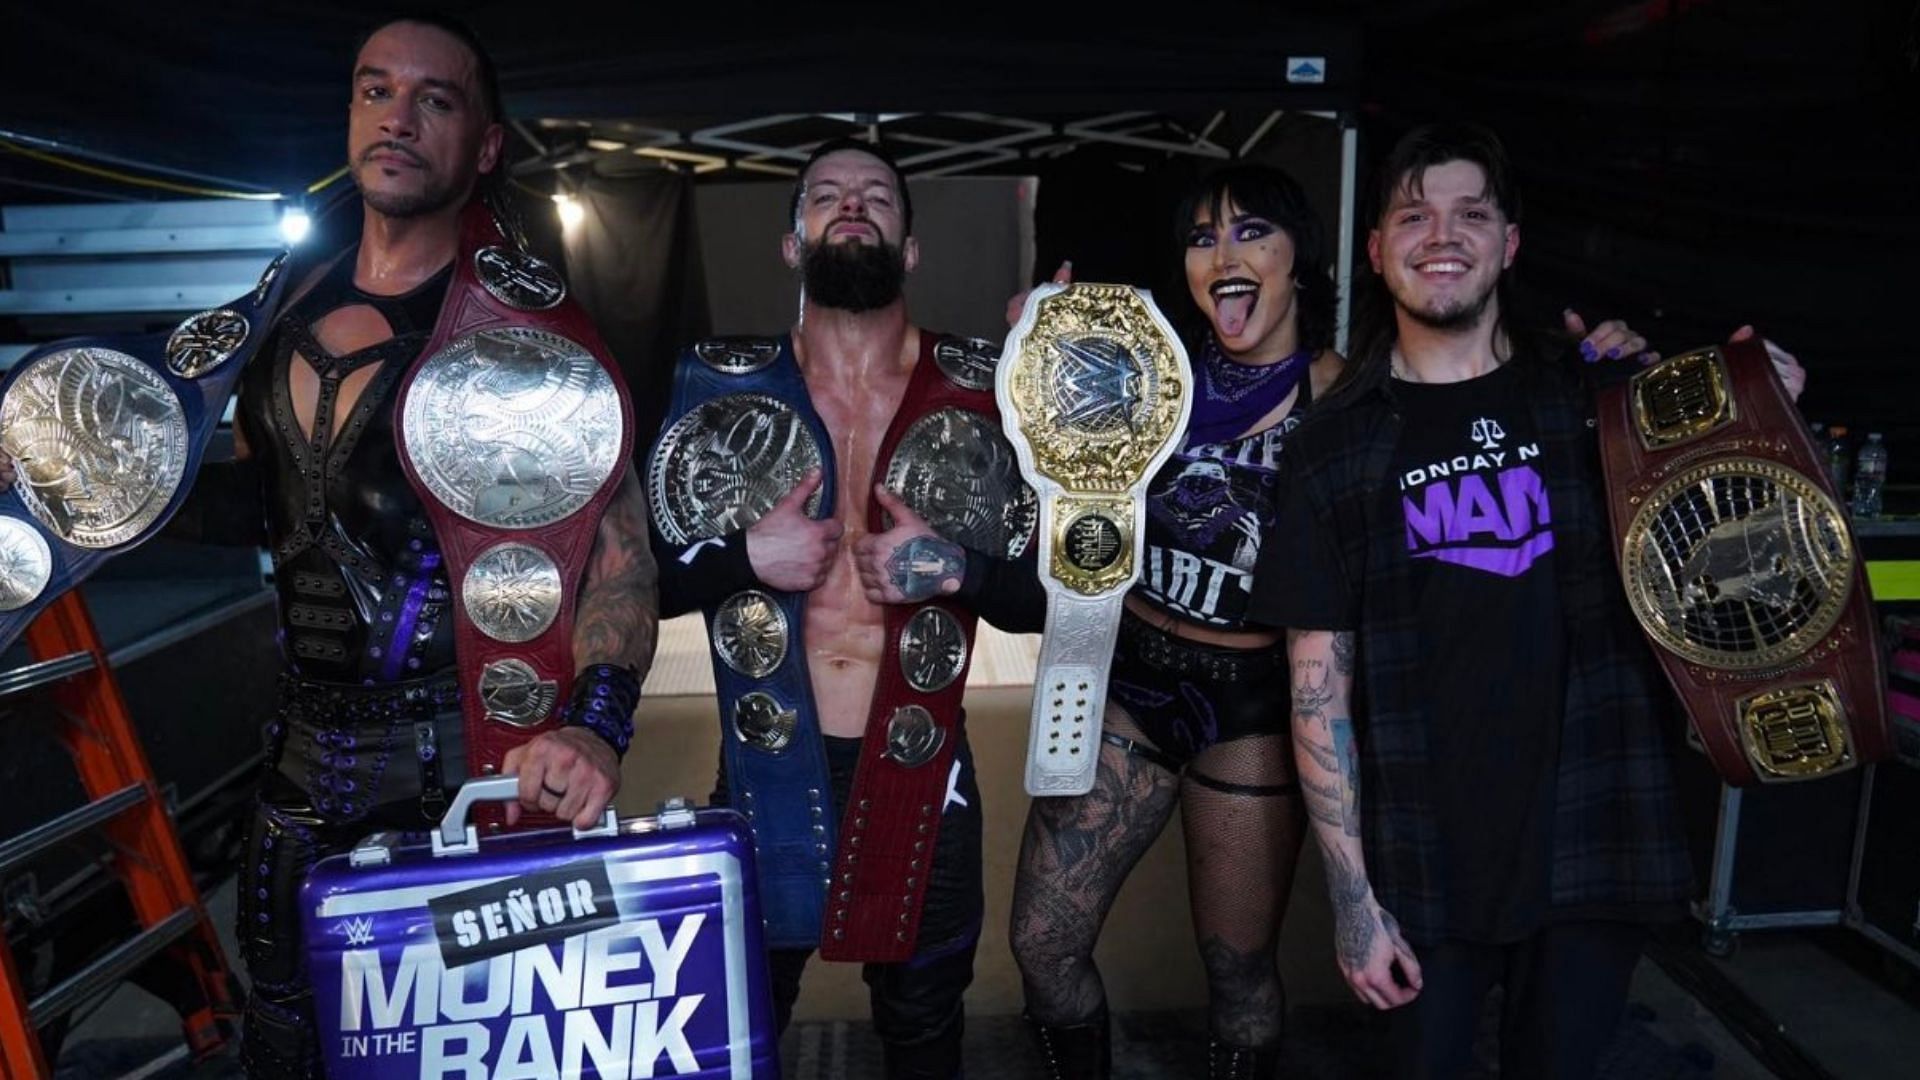 Every member of the faction is currently a champion.